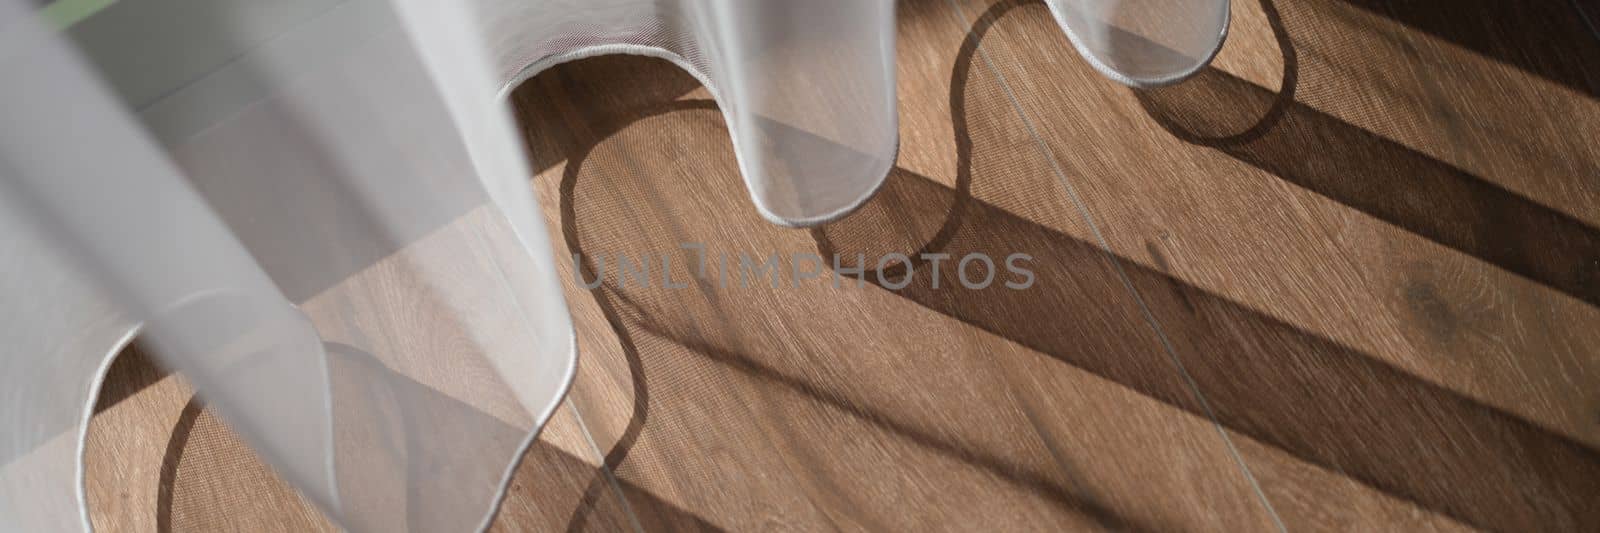 White curtains in midday sun create shade on brown wood floor in room. White transparent dederon concept